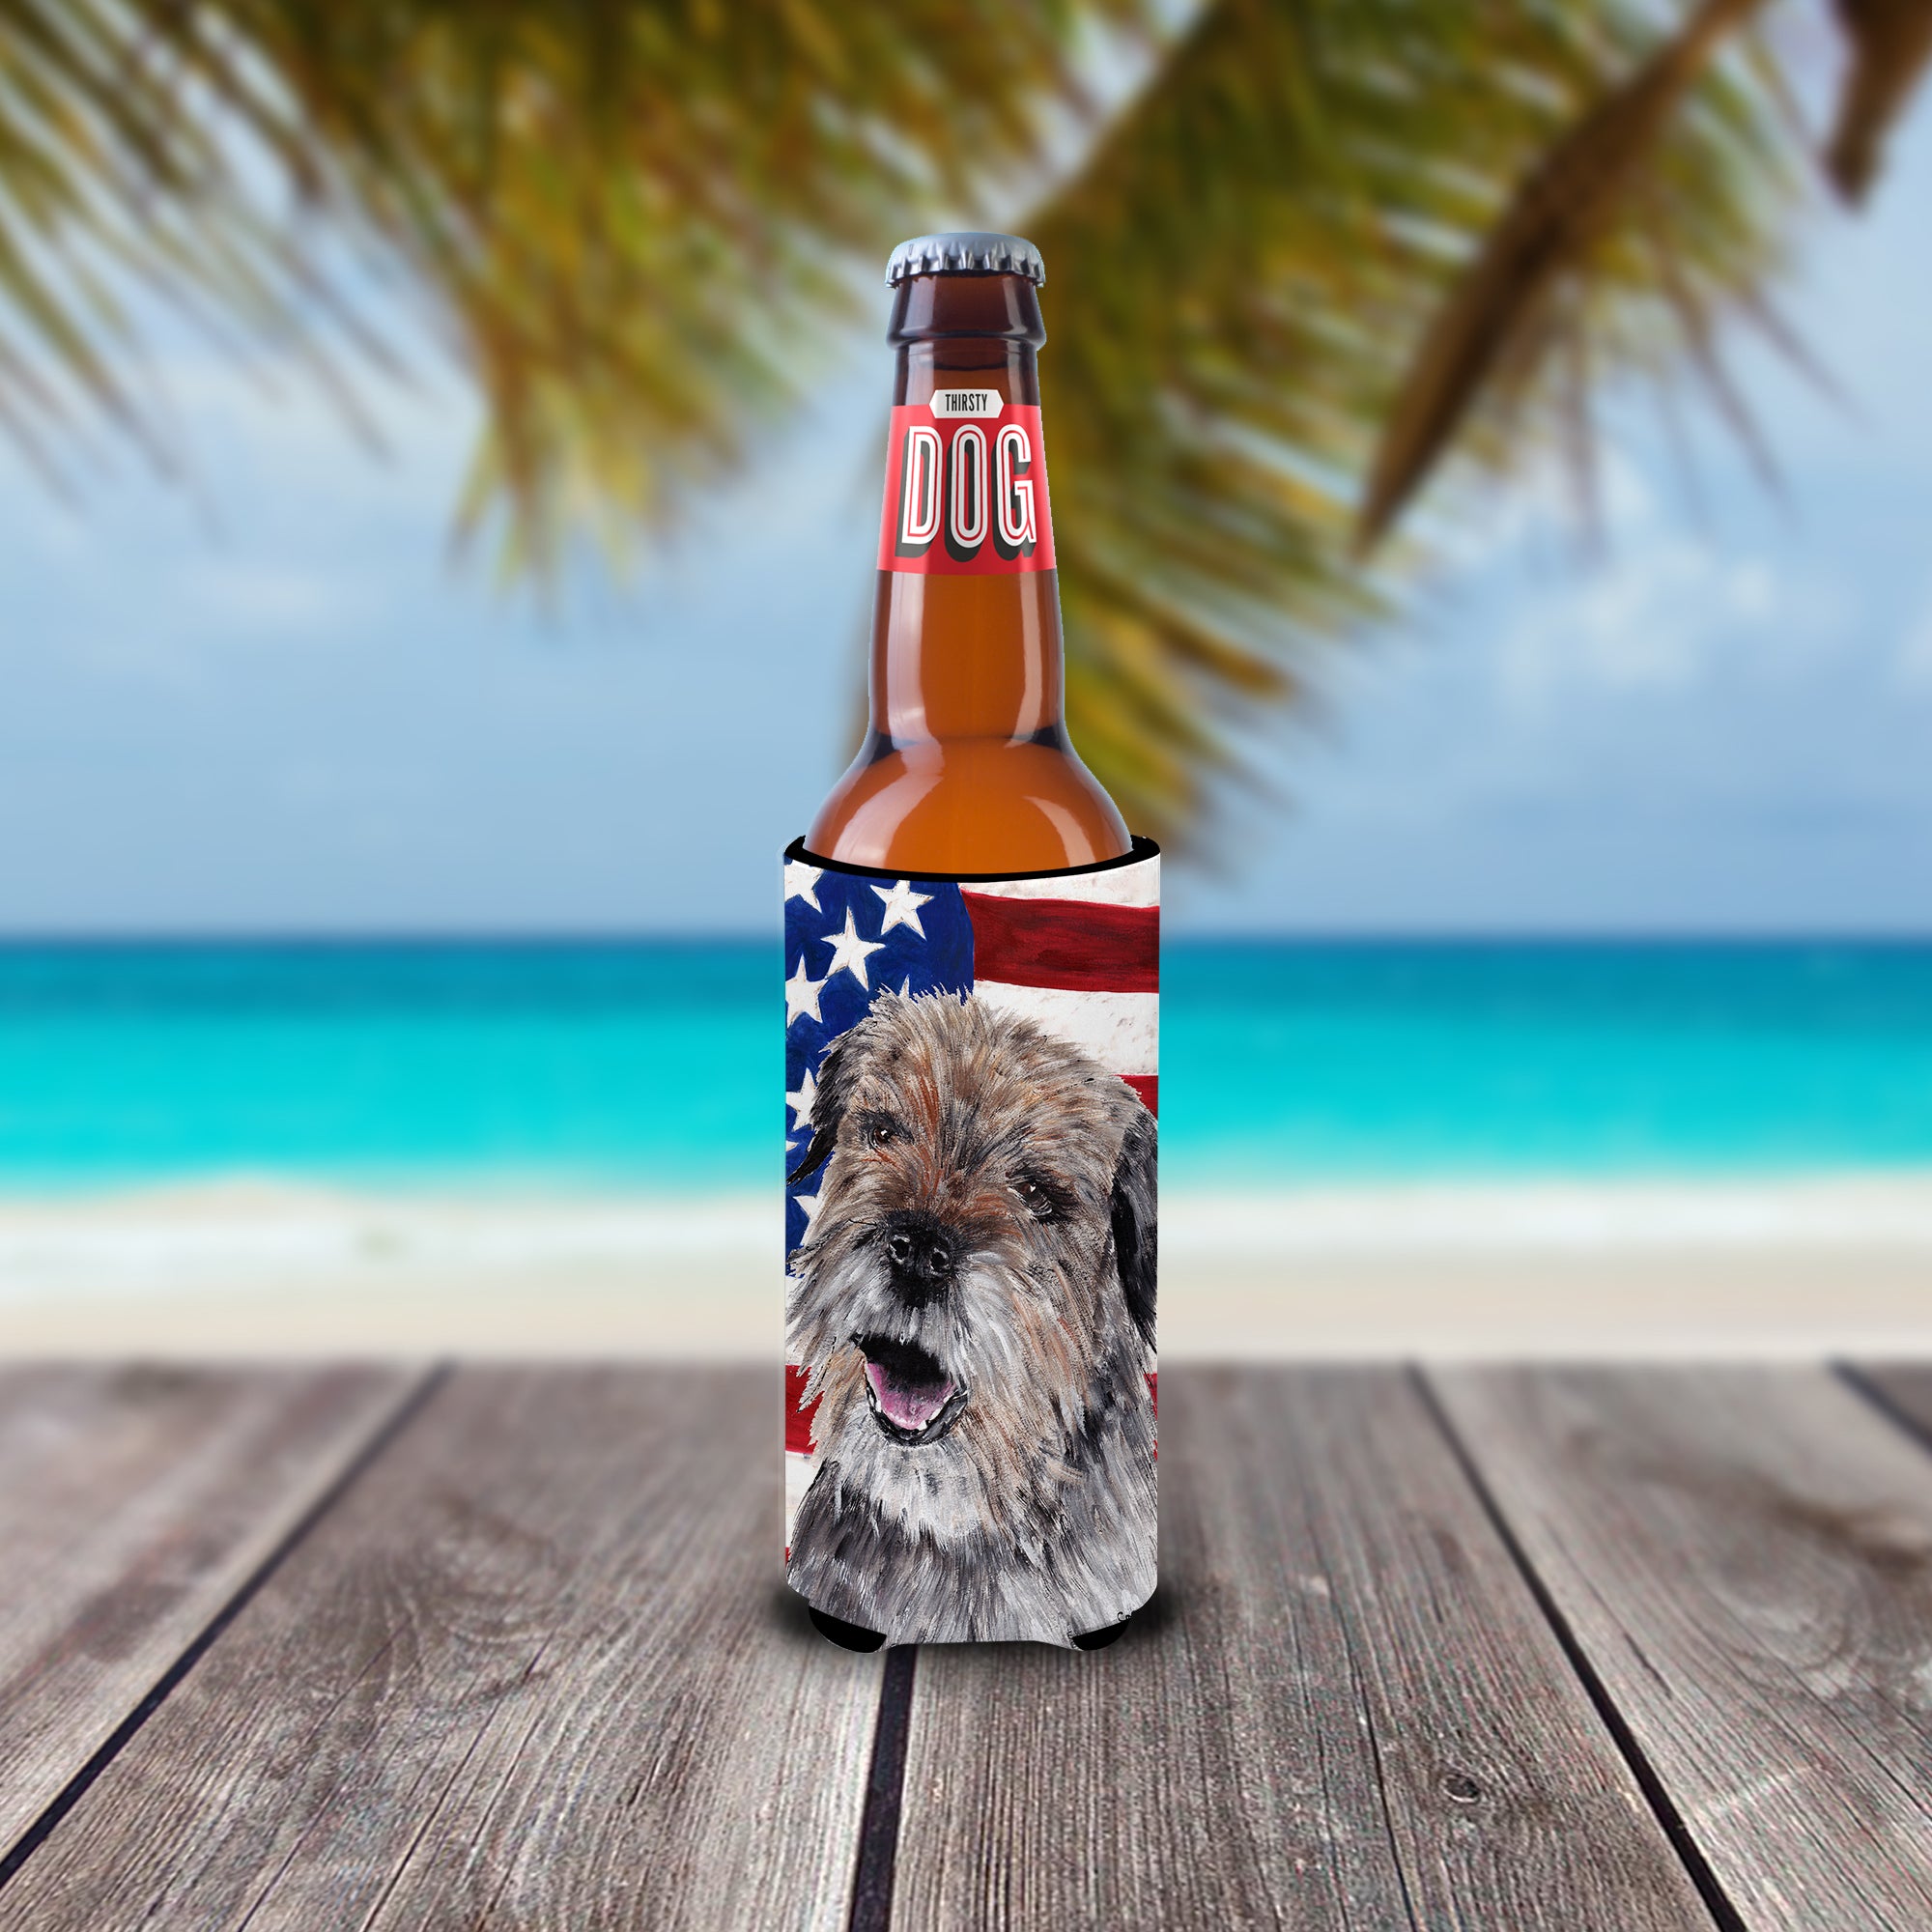 Border Terrier Mix USA American Flag Ultra Beverage Insulators for slim cans.